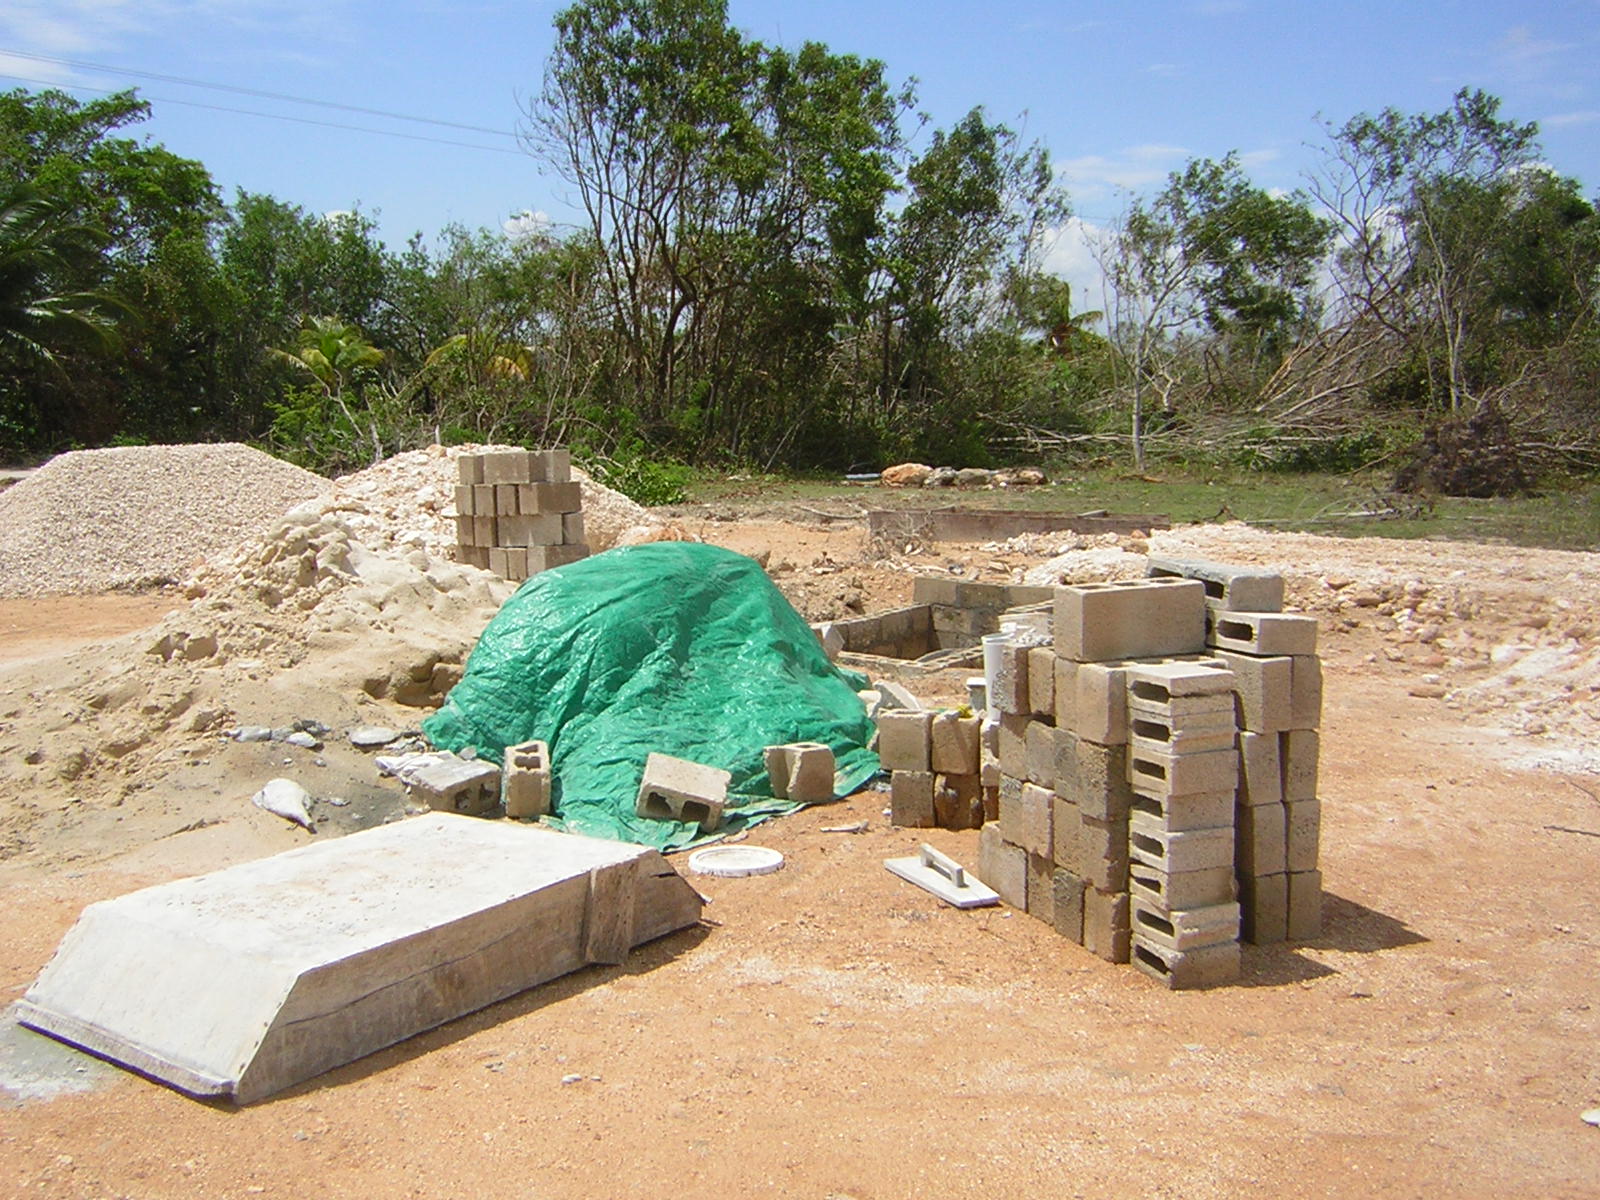 [Building+Supplies+for+Septic+System-2+9-1-2007+12-36-37+PM+1600x1200.JPG]